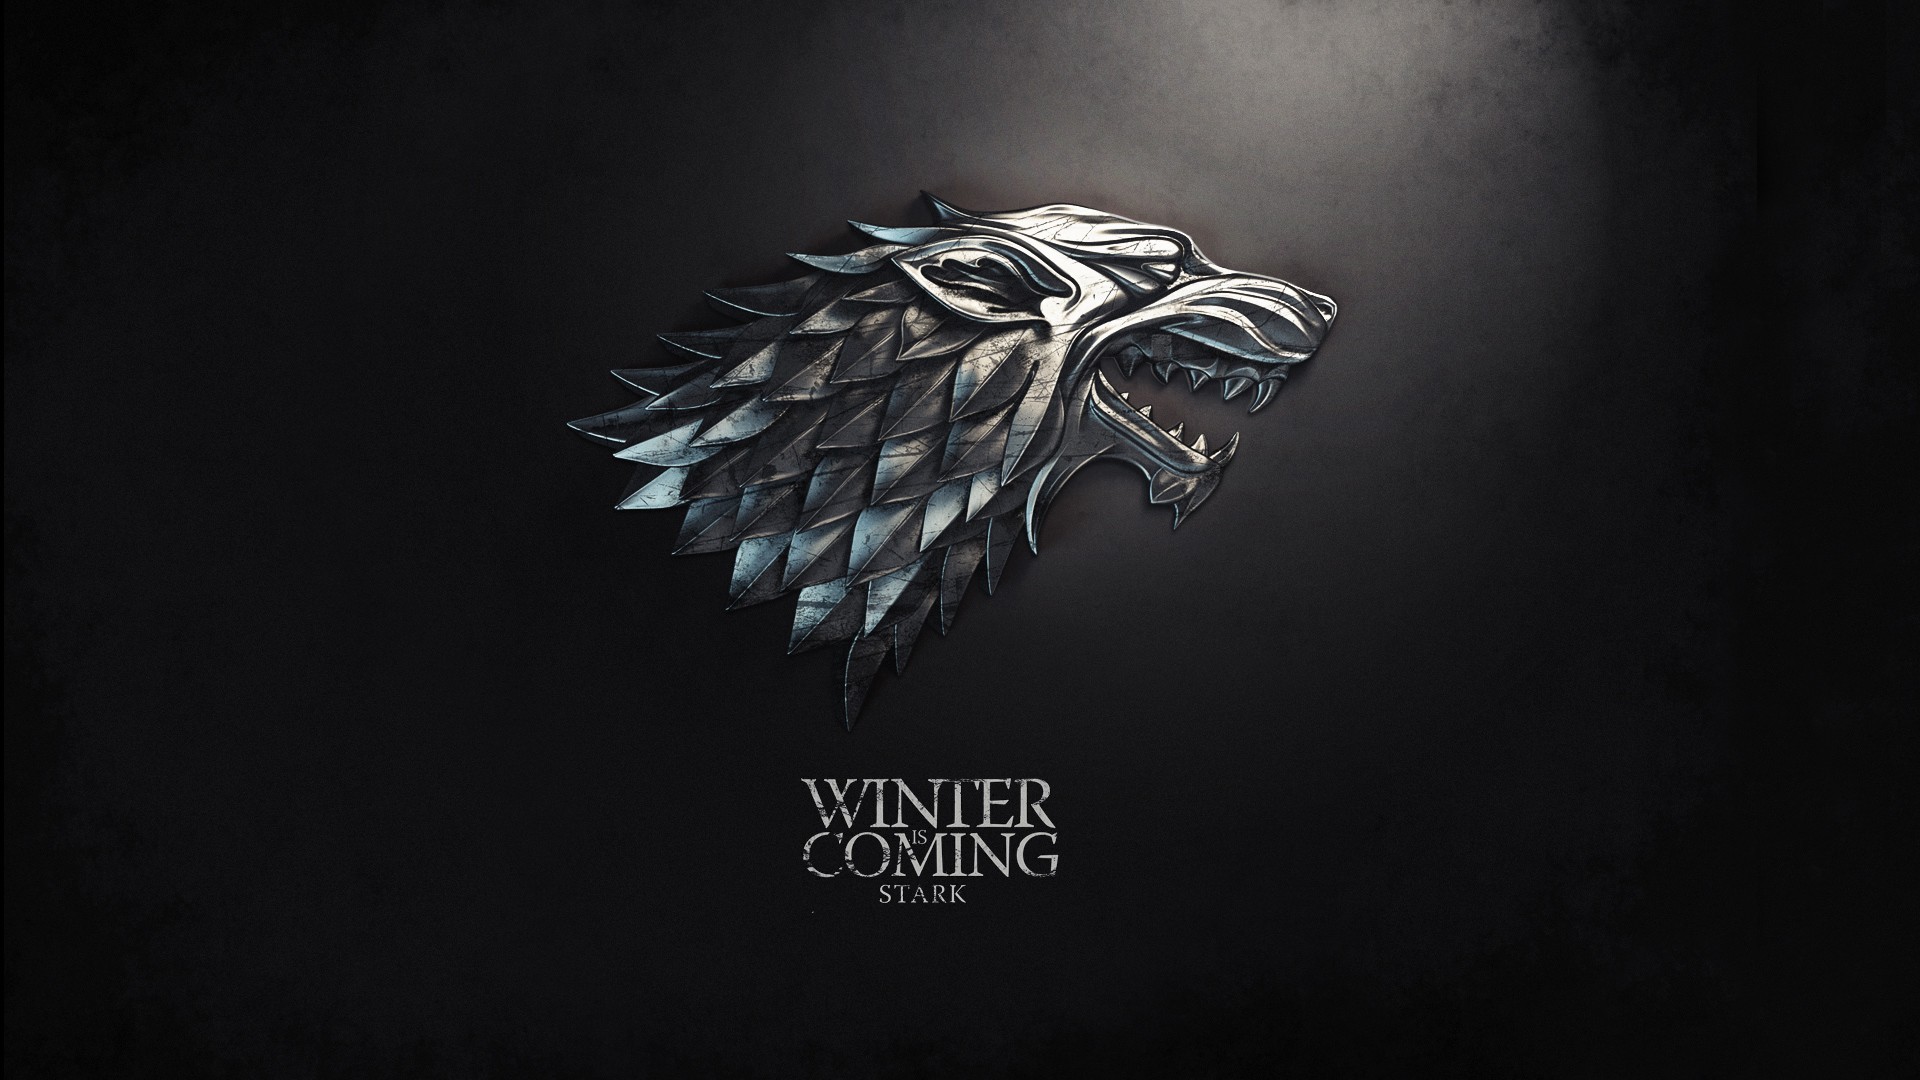 1920x1080 Source : http://wallpaperhd3d.com/game-of-thrones-